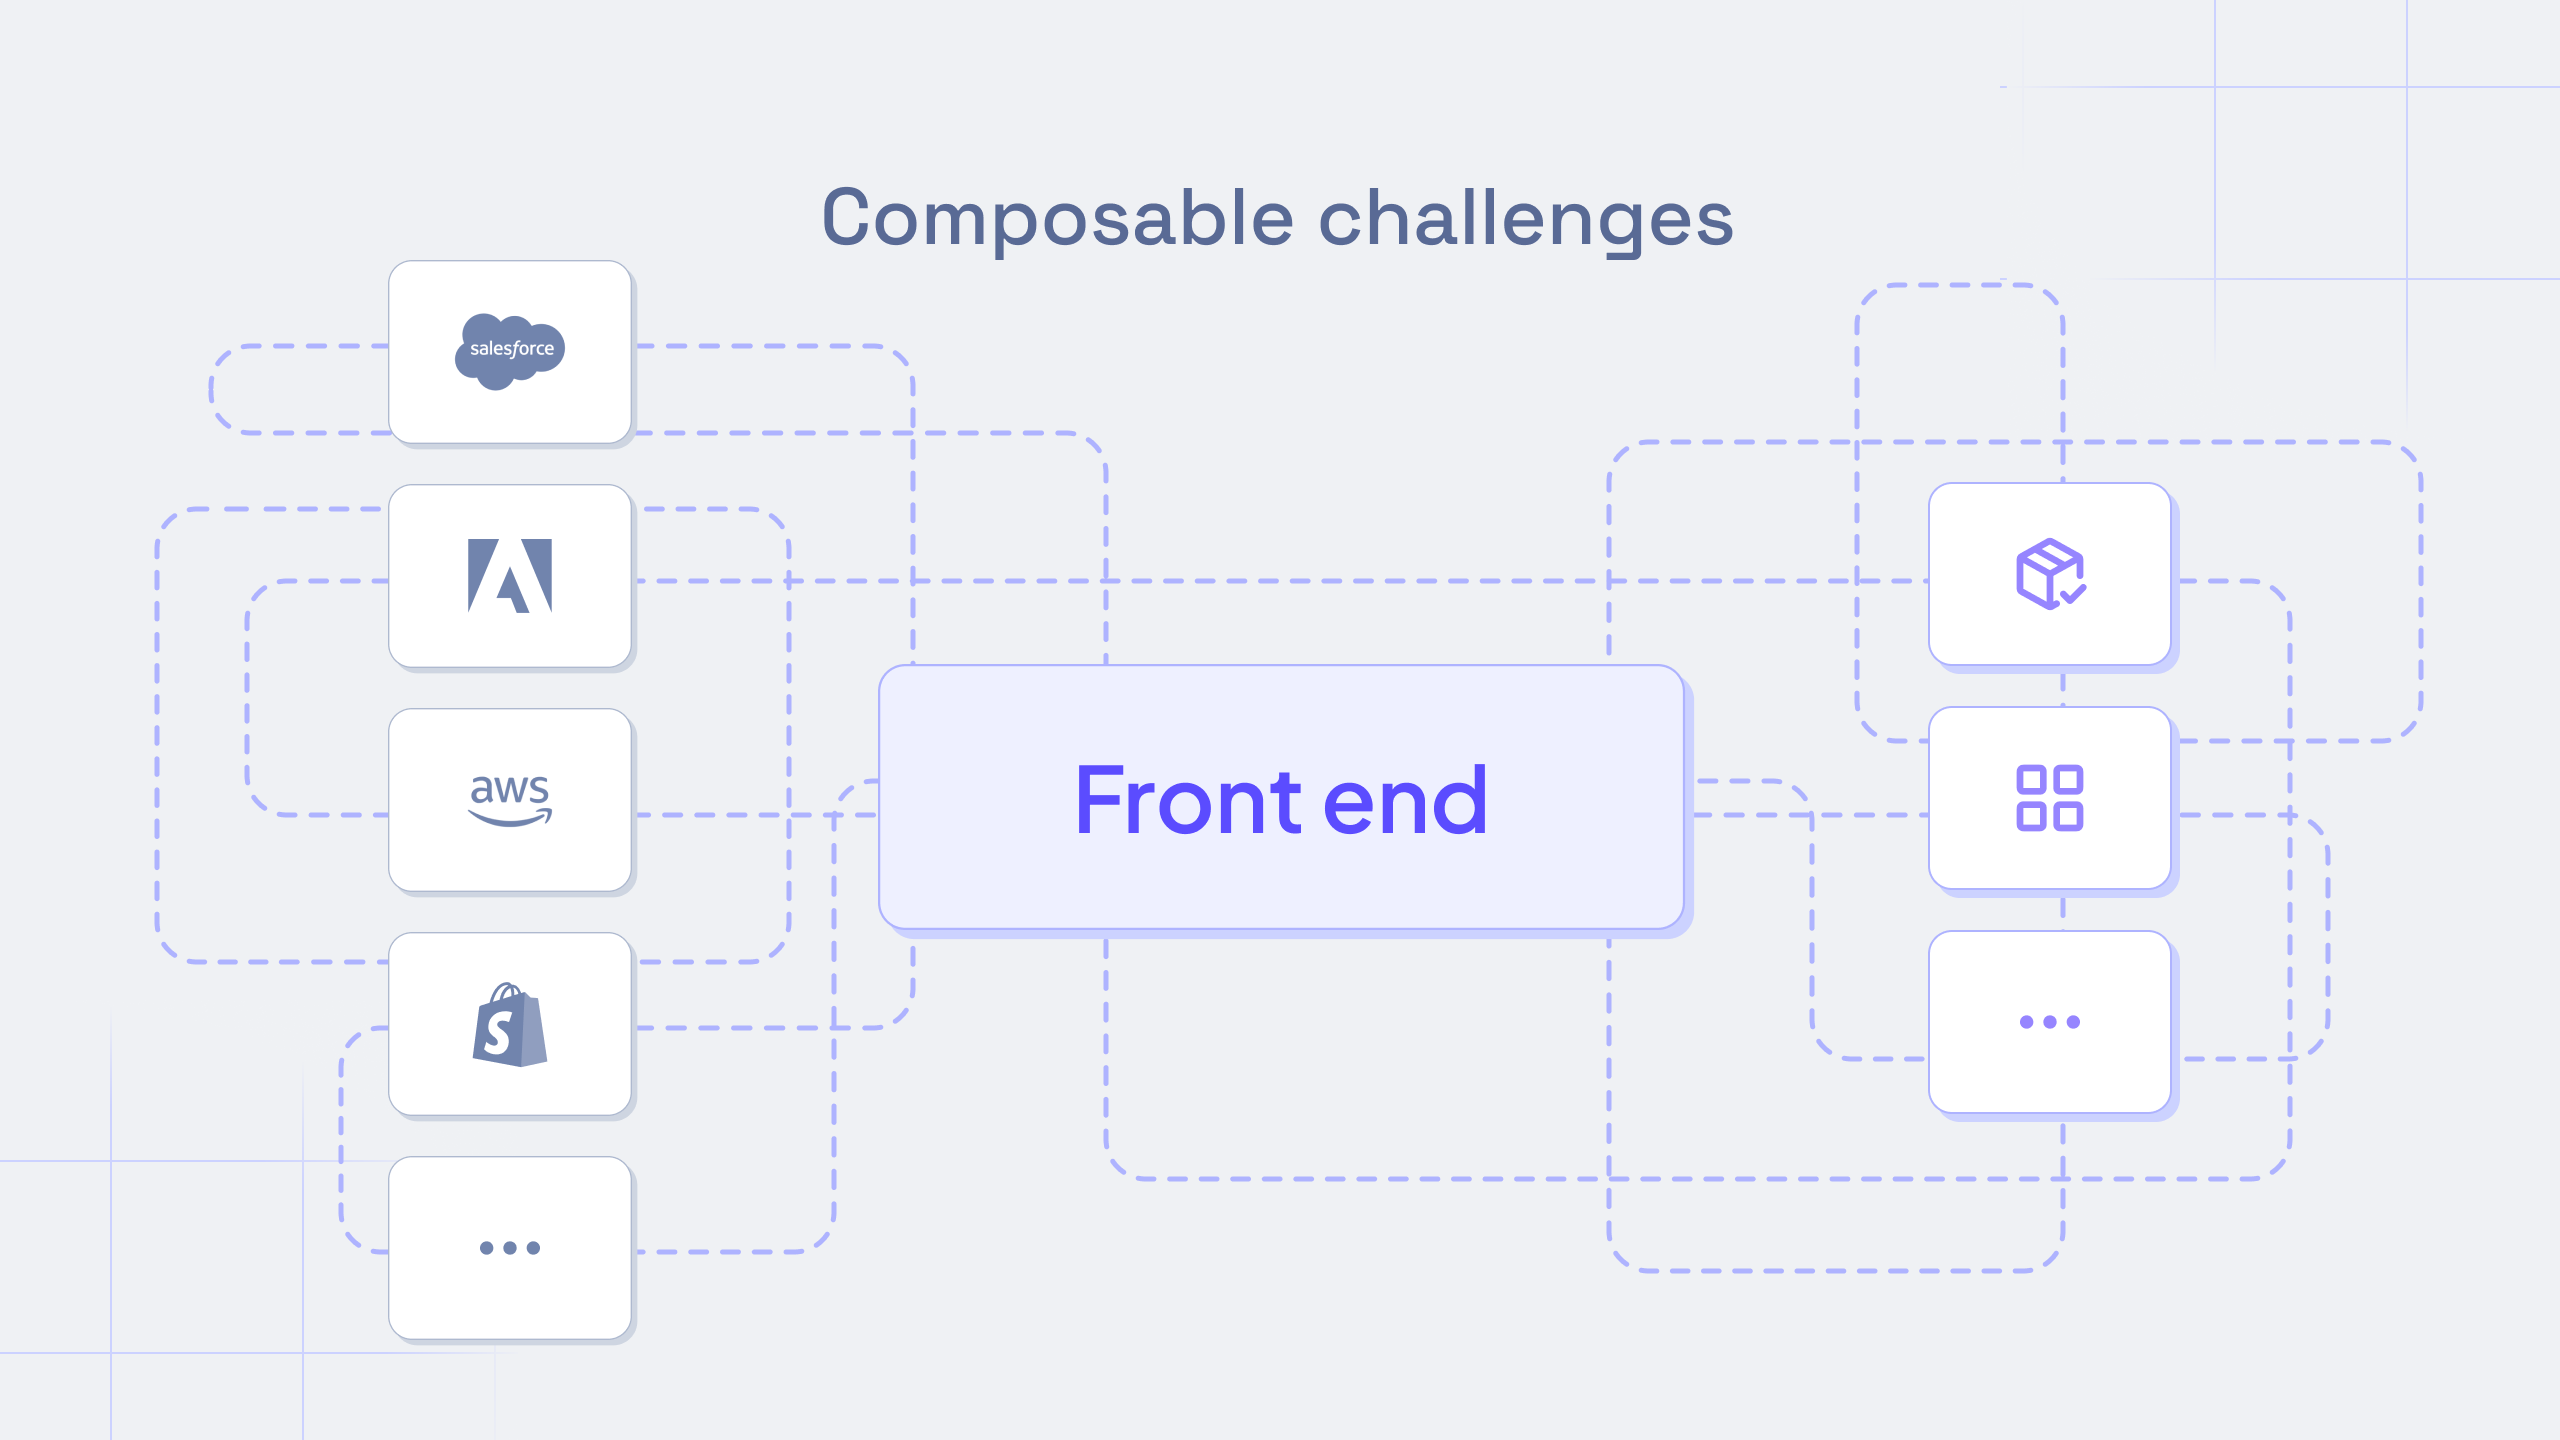 Composable challenges